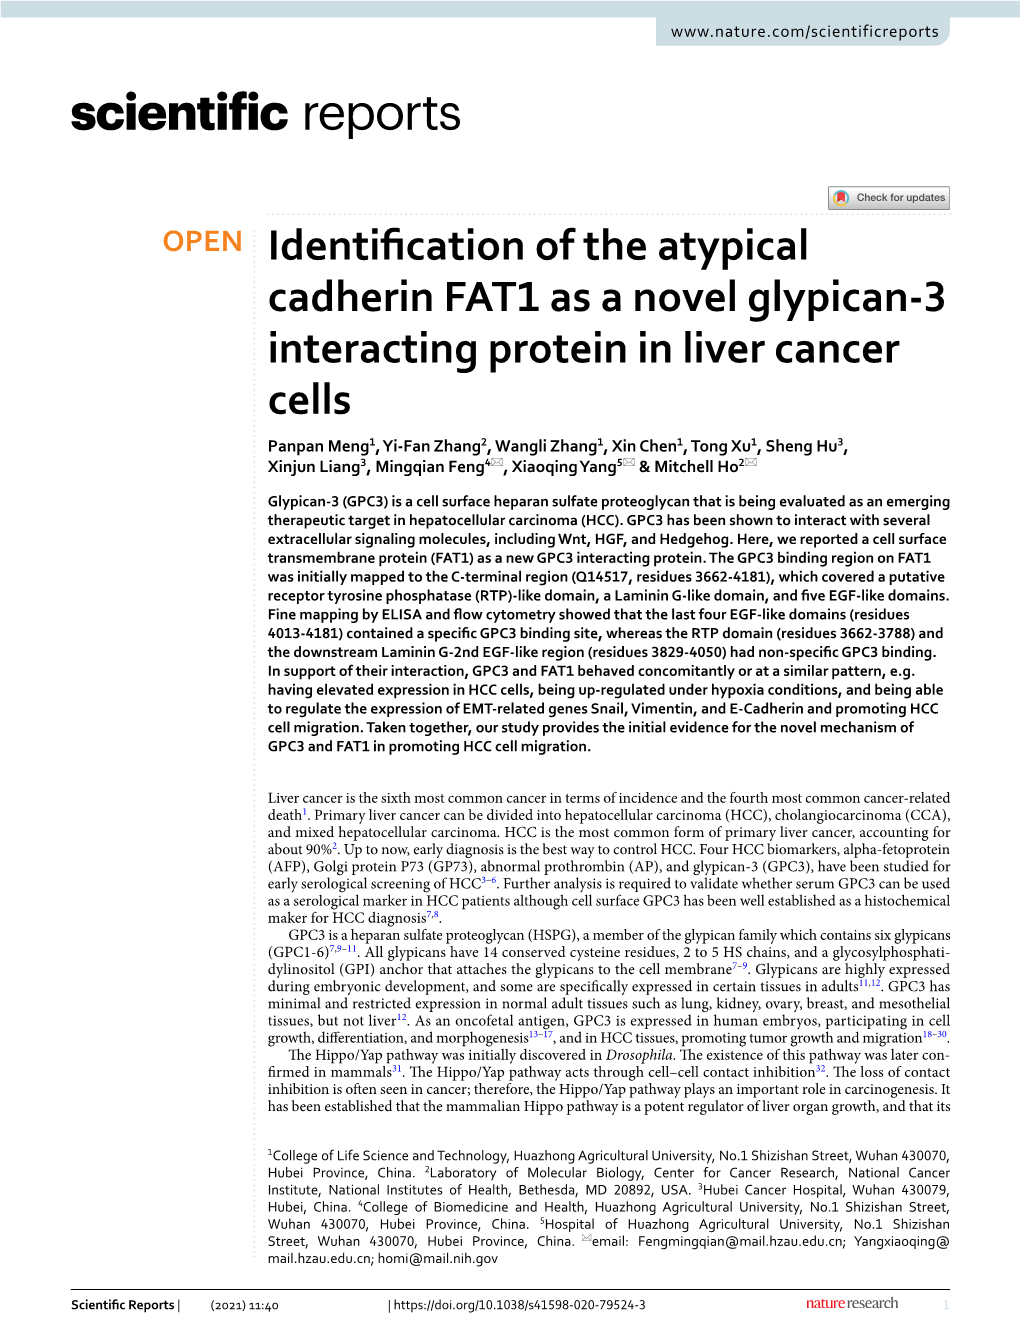 Identification of the Atypical Cadherin FAT1 As a Novel Glypican-3 Interacting Protein in Liver Cancer Cells